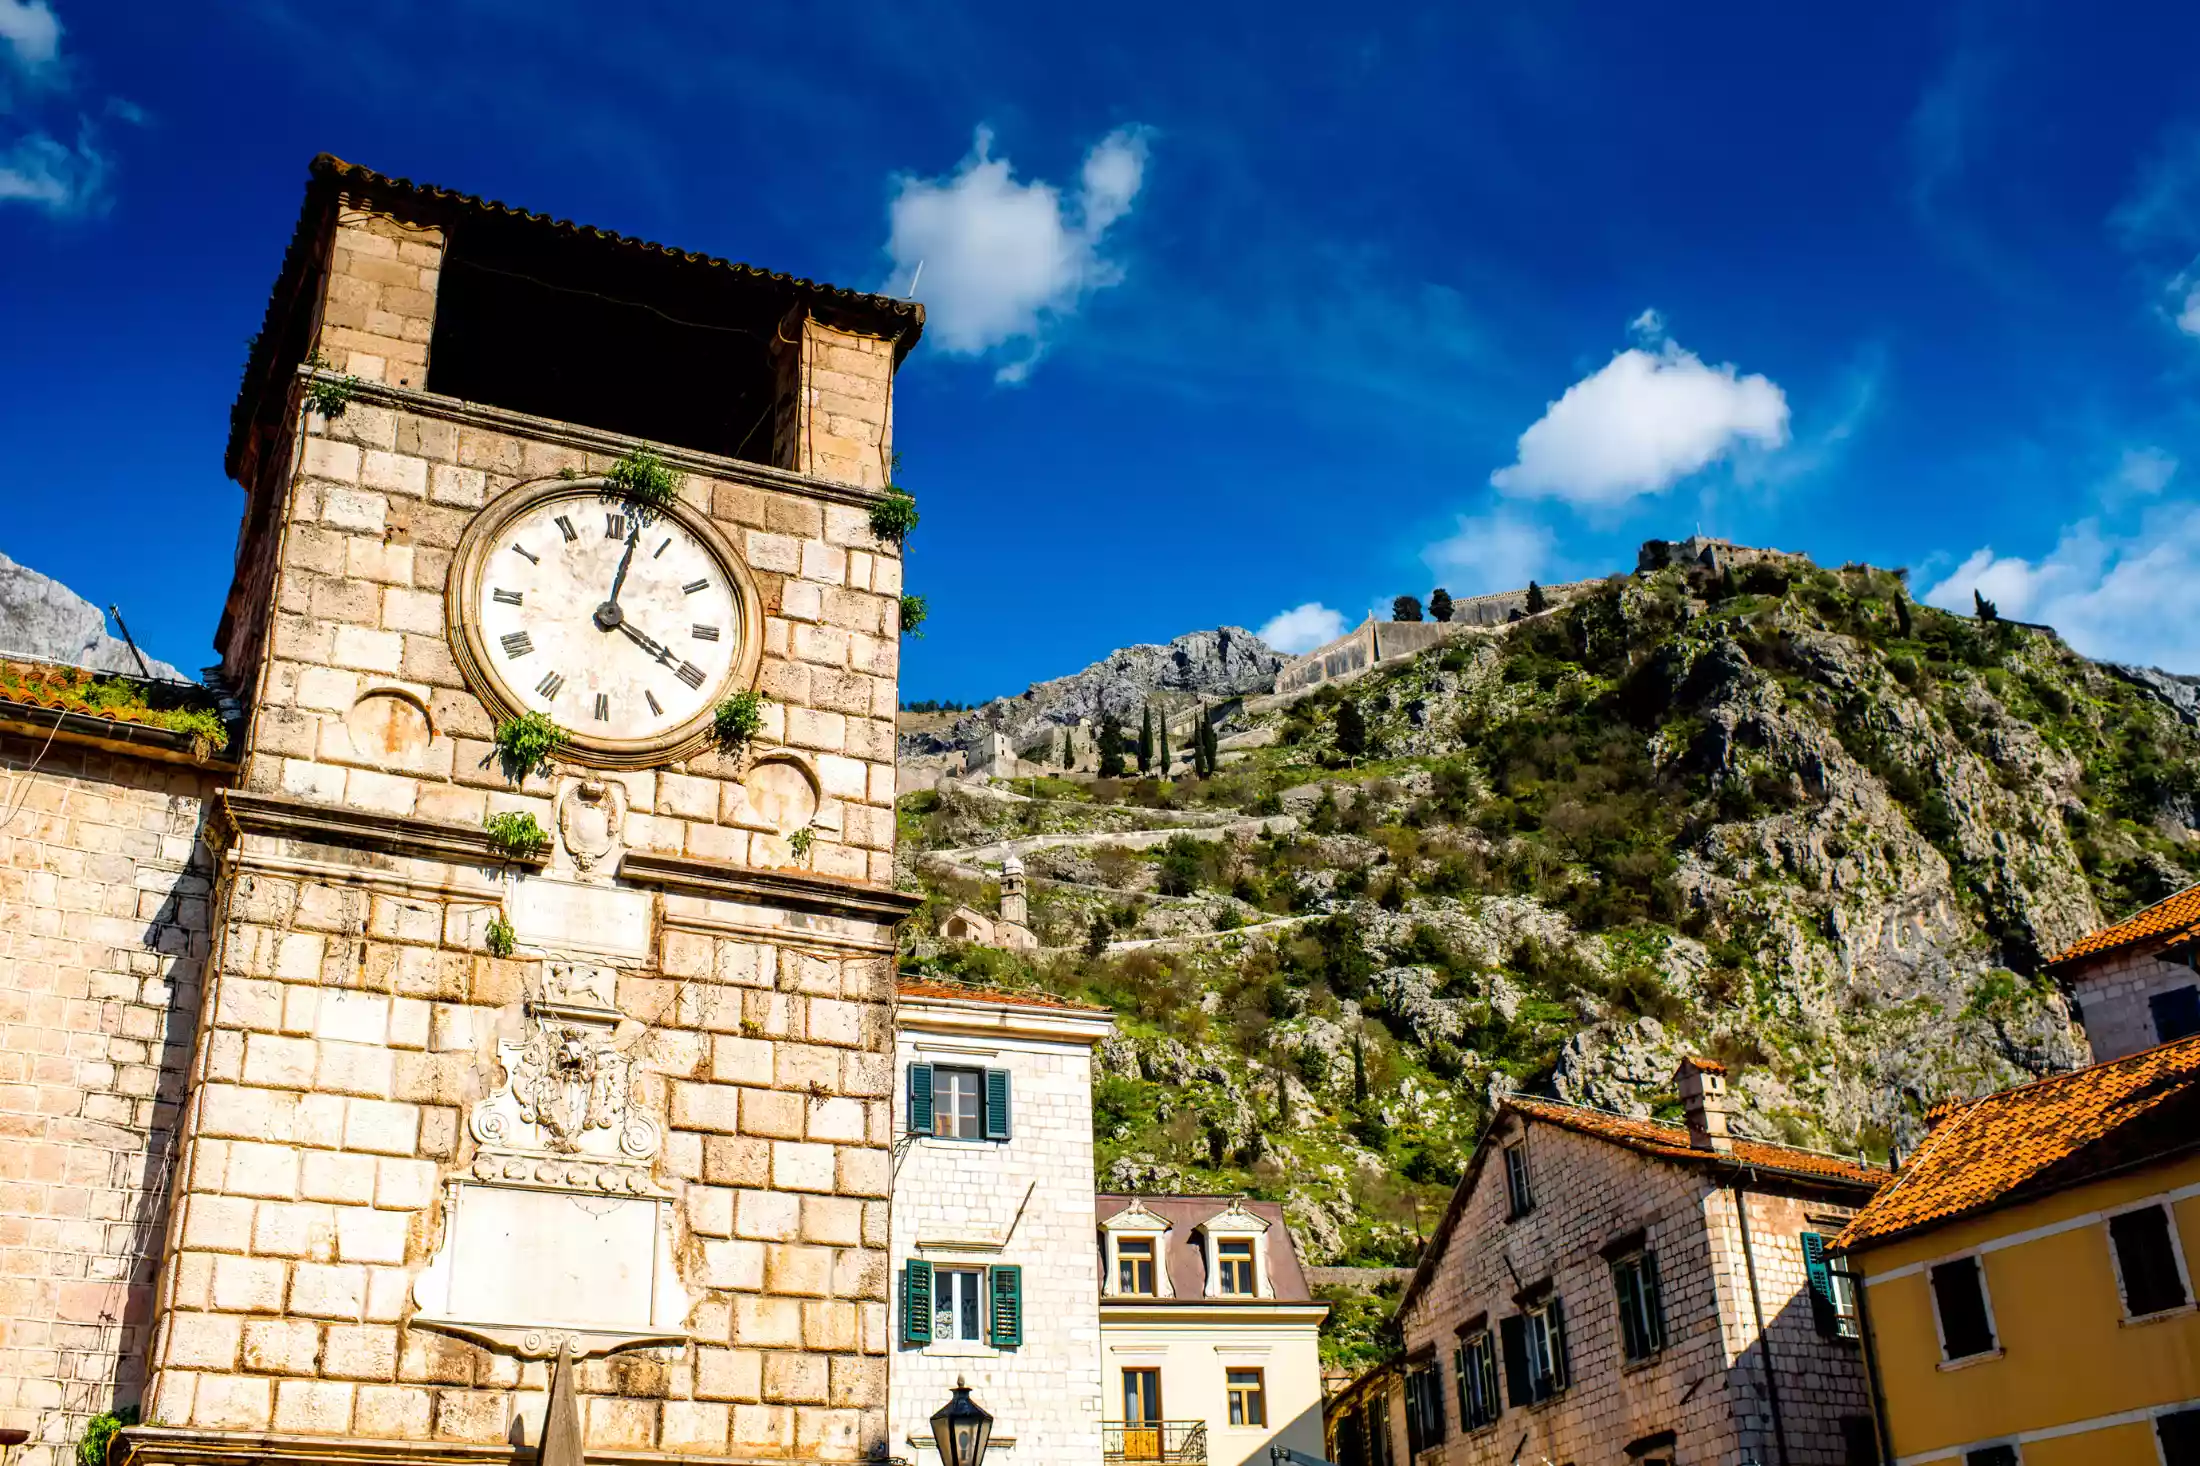 The Clock Tower in Old Town Kotor in Montenegro